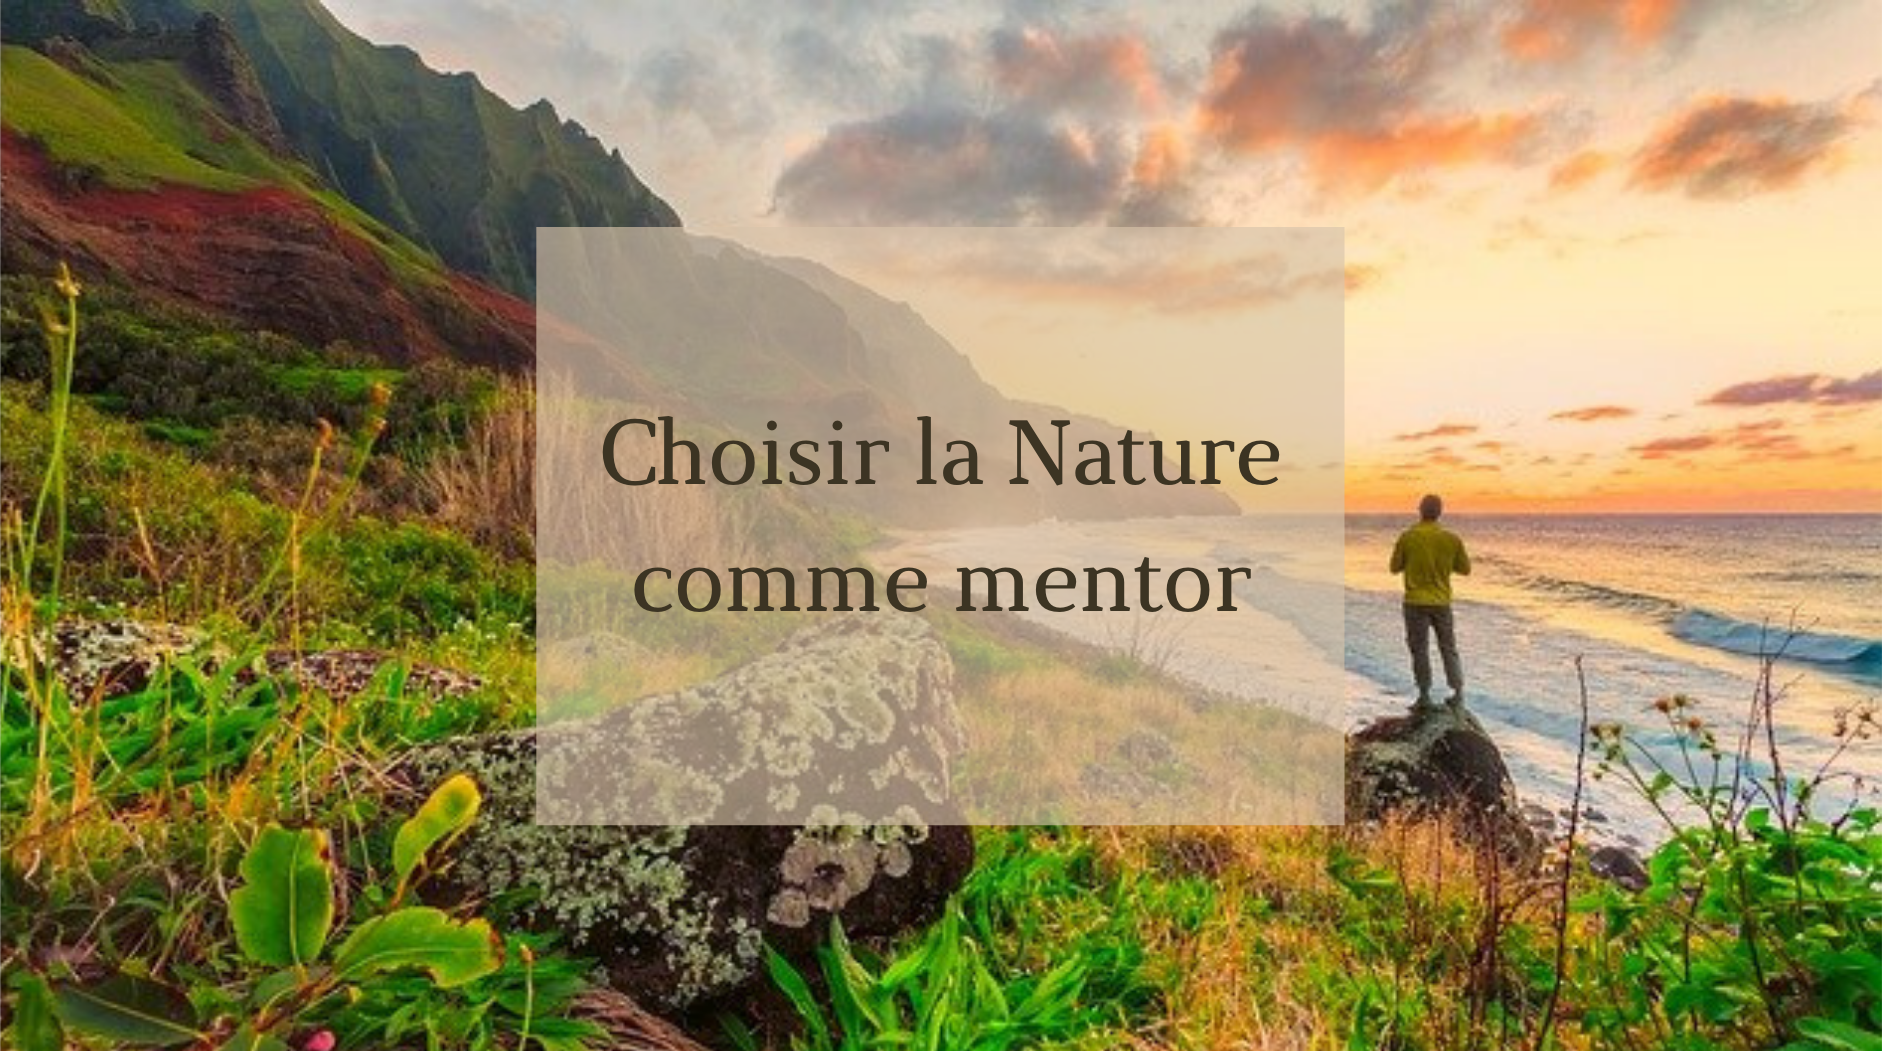 You are currently viewing Choisir la Nature comme mentor